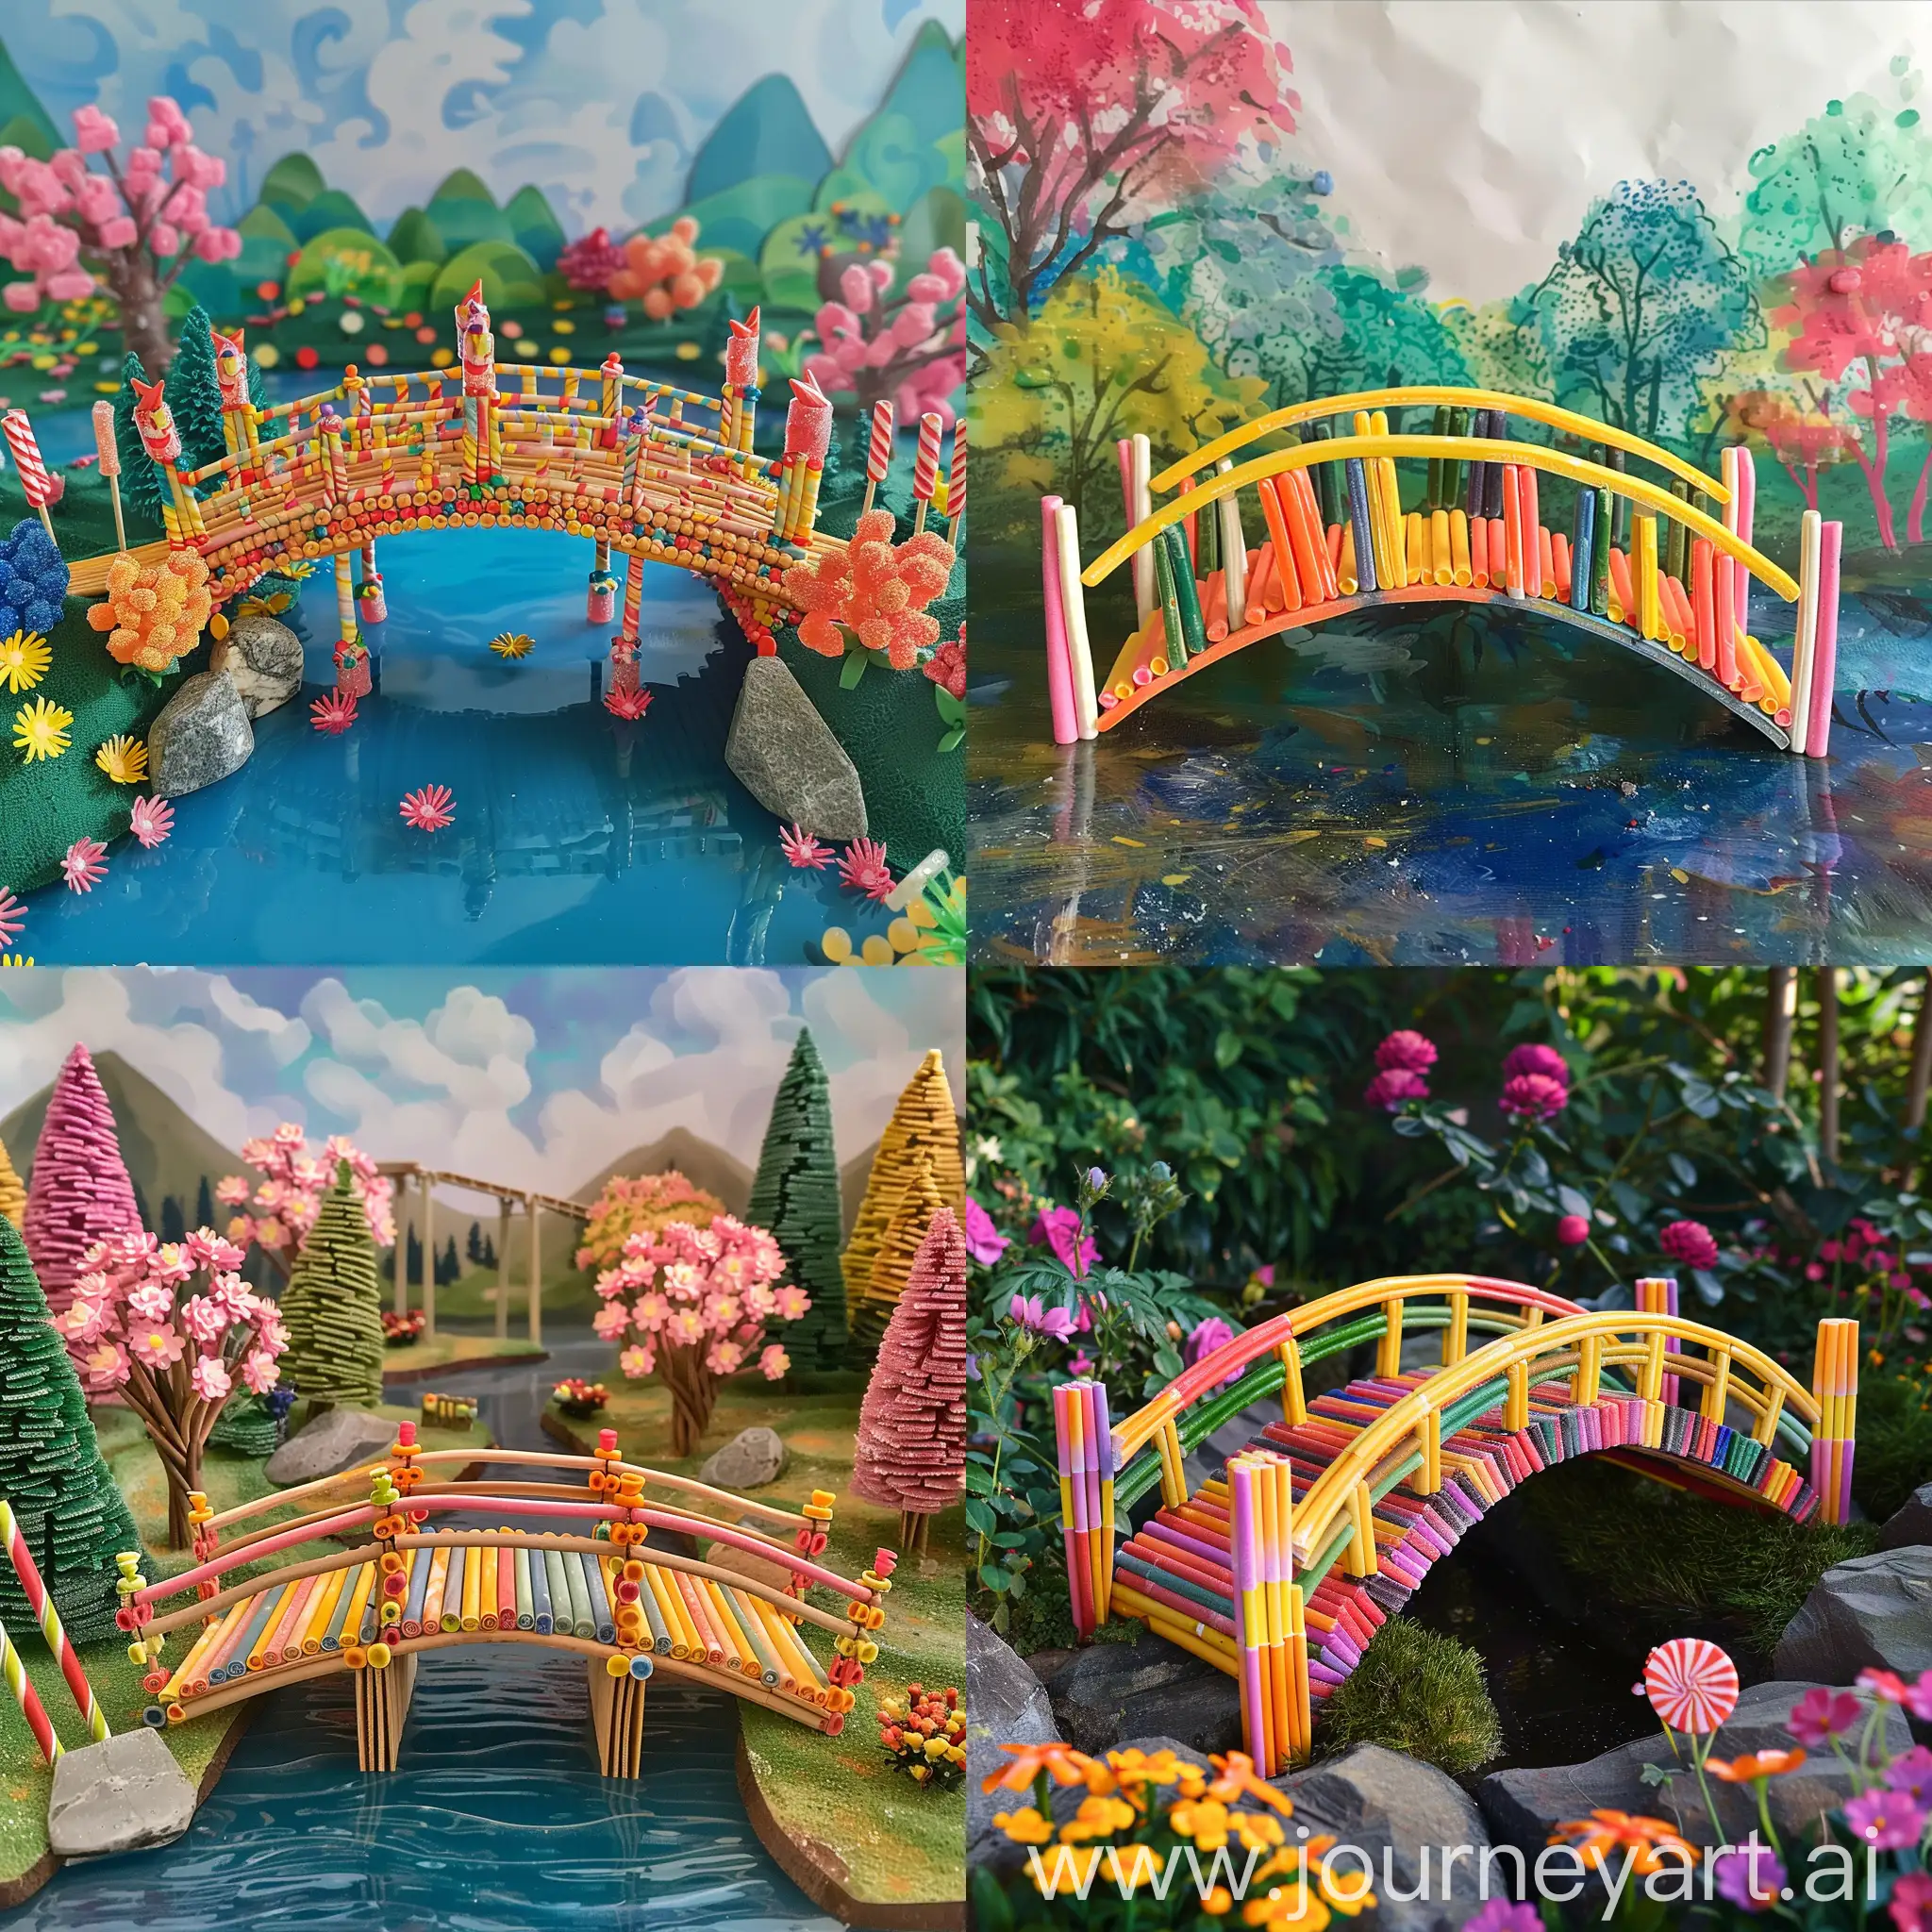 please create a picture of a bridge made from lollipop sticks